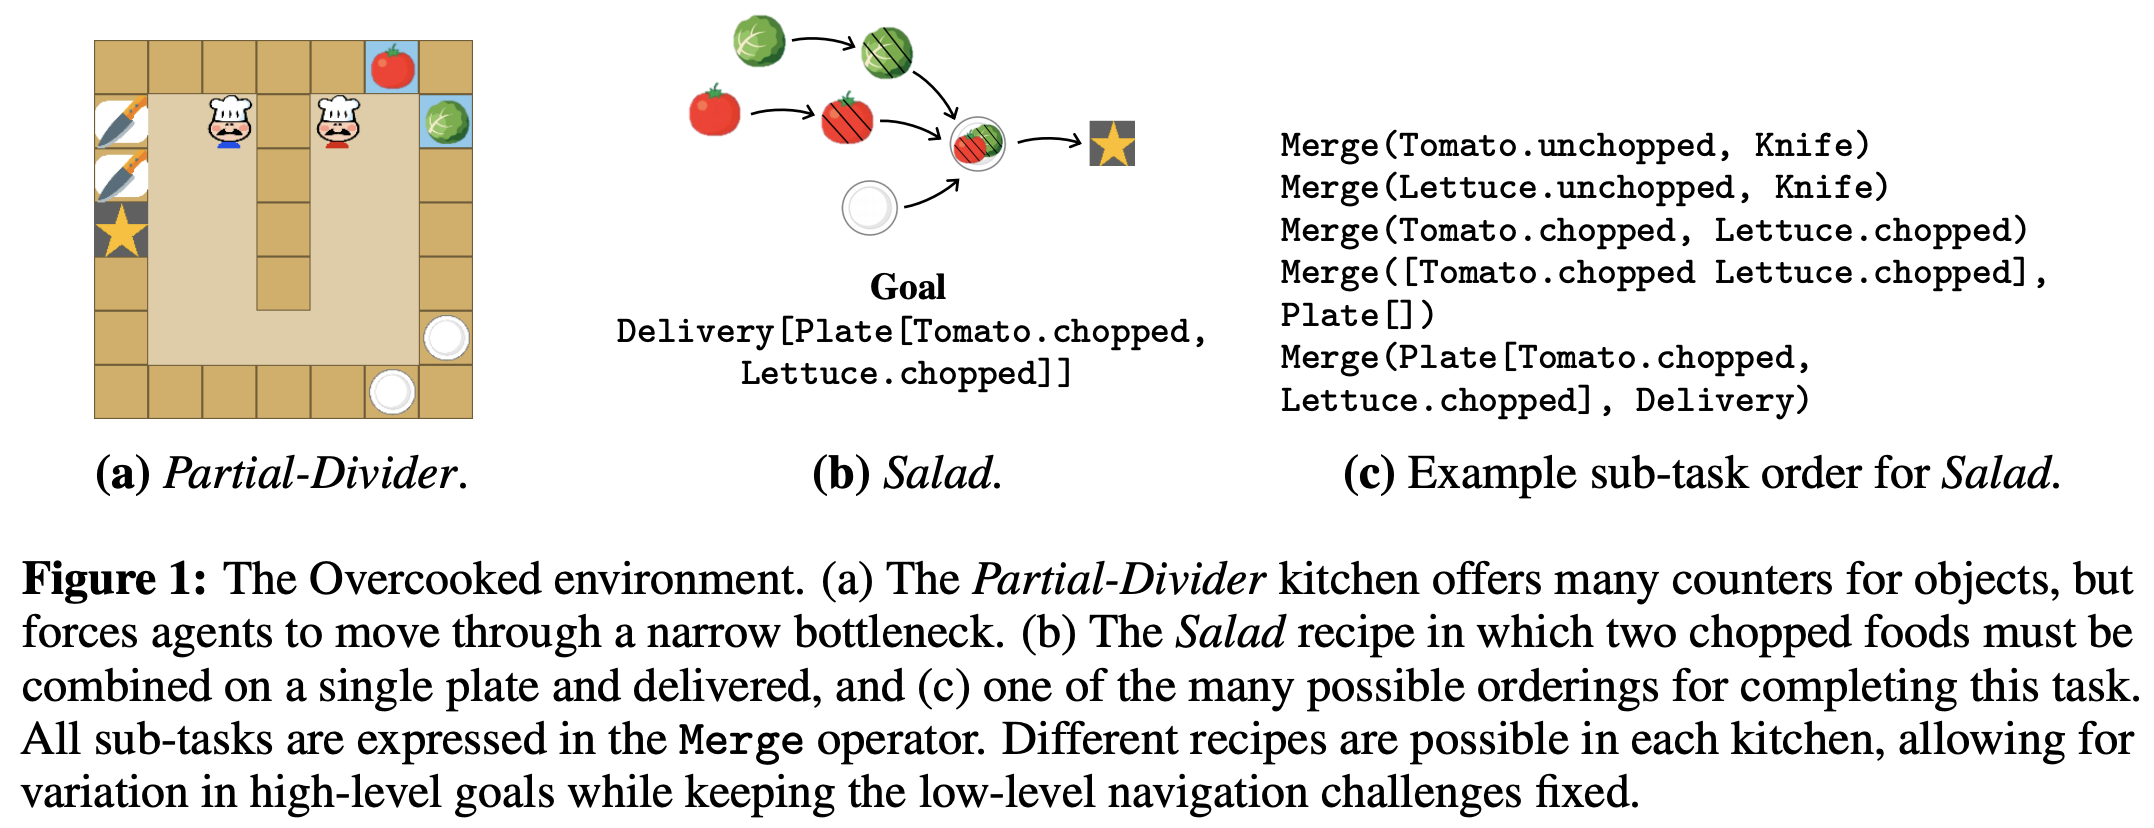 The Overcooked environment and the sub-tasks to deliver a salad. [[source](https://arxiv.org/pdf/2003.11778.pdf)]